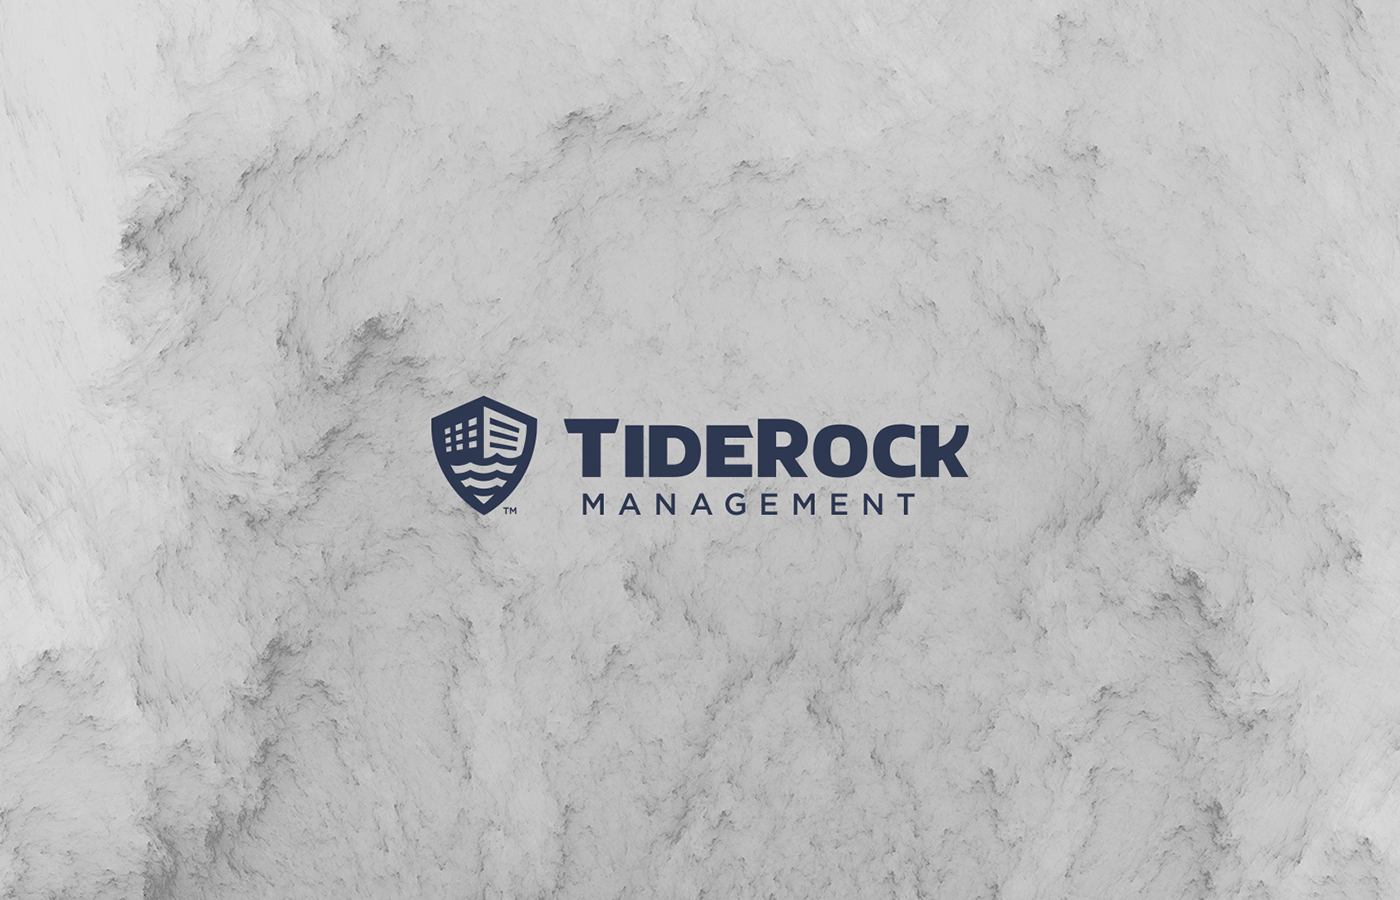 tide rock commercial real estate logo identity type property portfolio new hampshire portsmouth boston New England Collateral comite